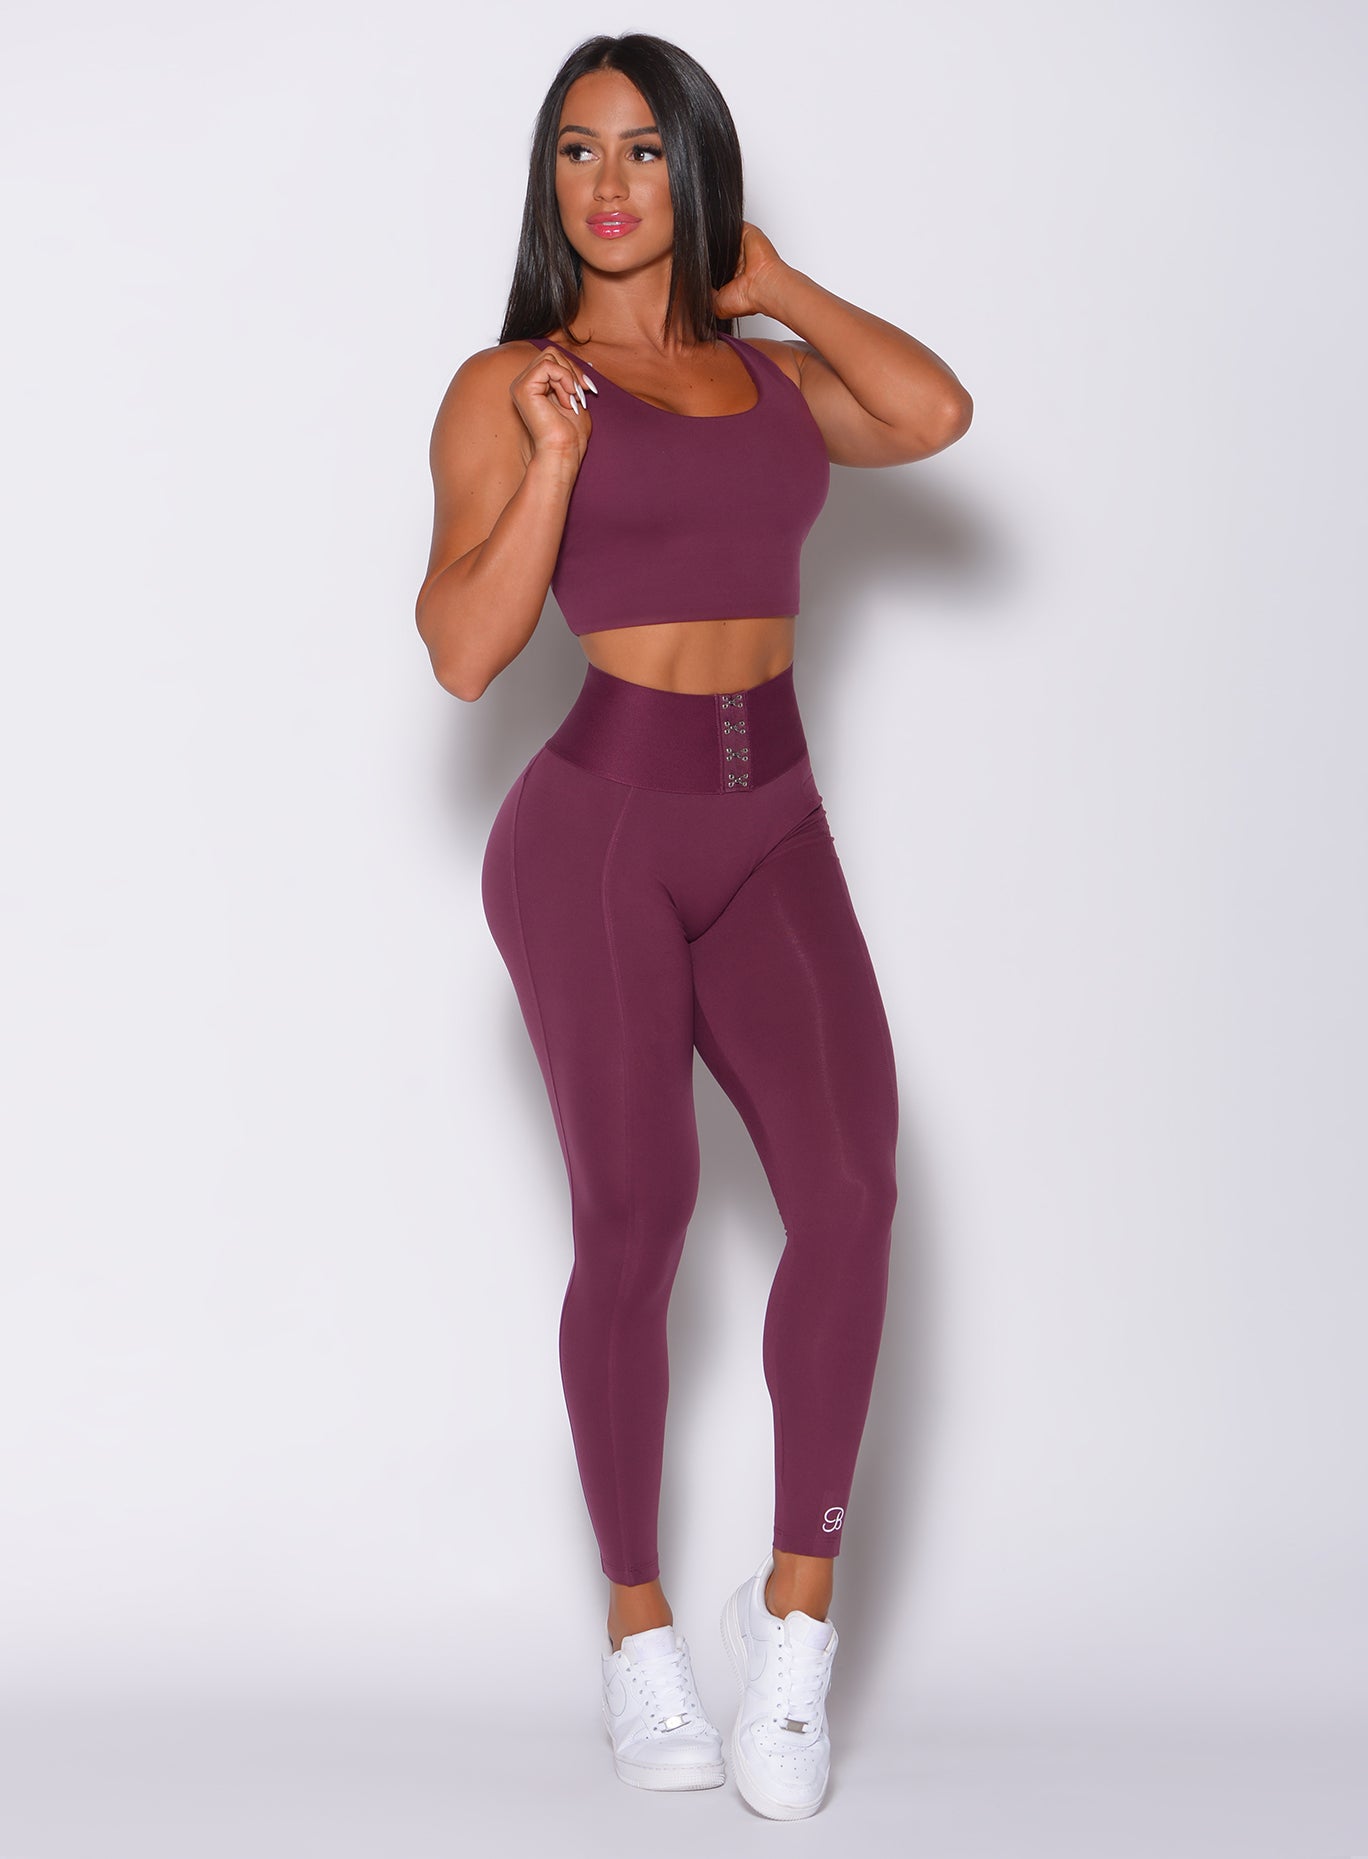 Front profile view of a model wearing our waist cincher leggings in majestic purple color and a matching bra